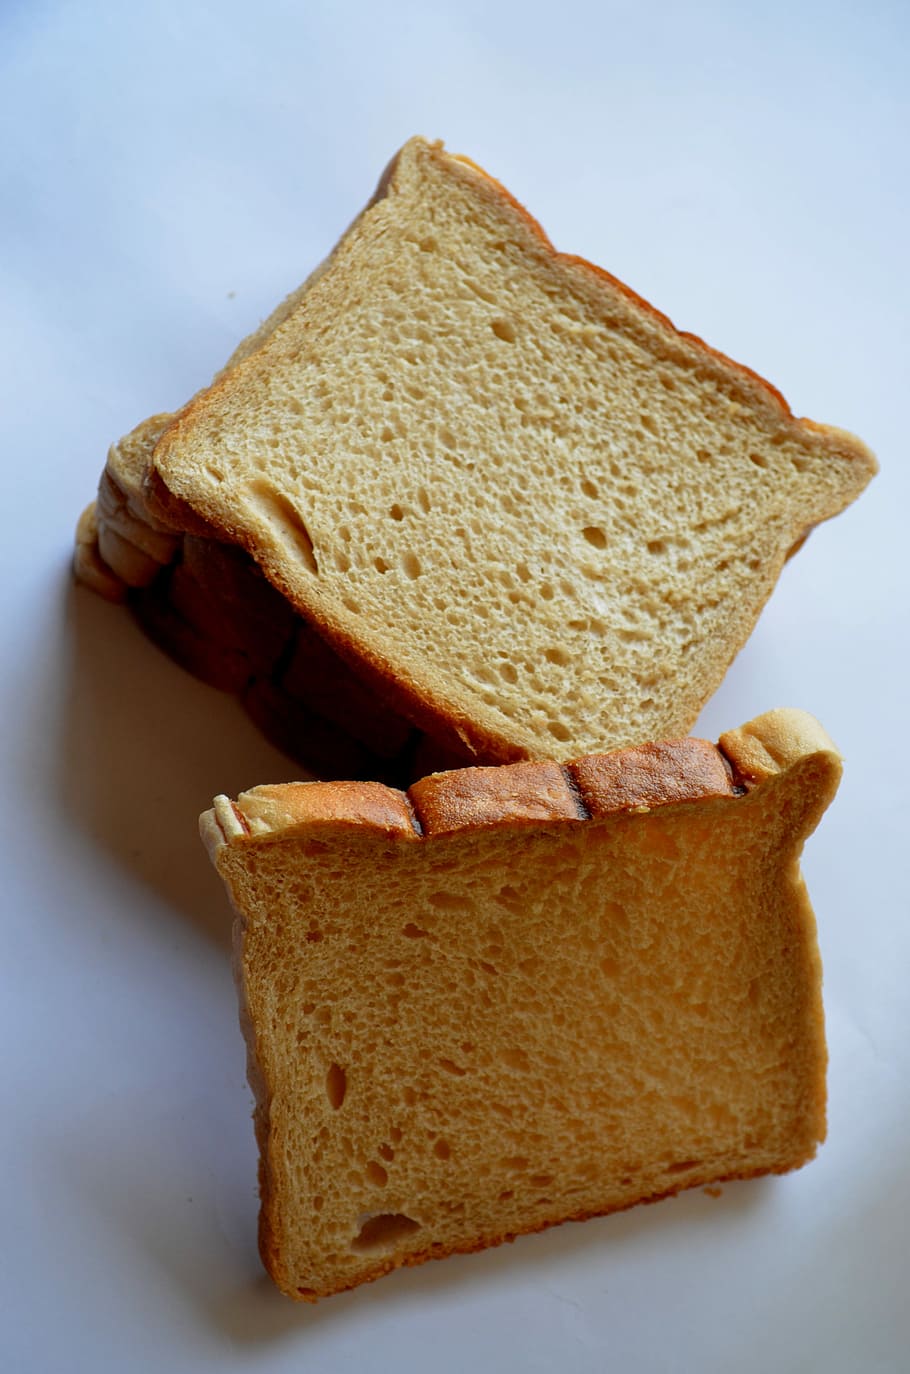 Bread, Slices, Toasting, Food, bread for toasting, nutrition, white, meal, diet, snack